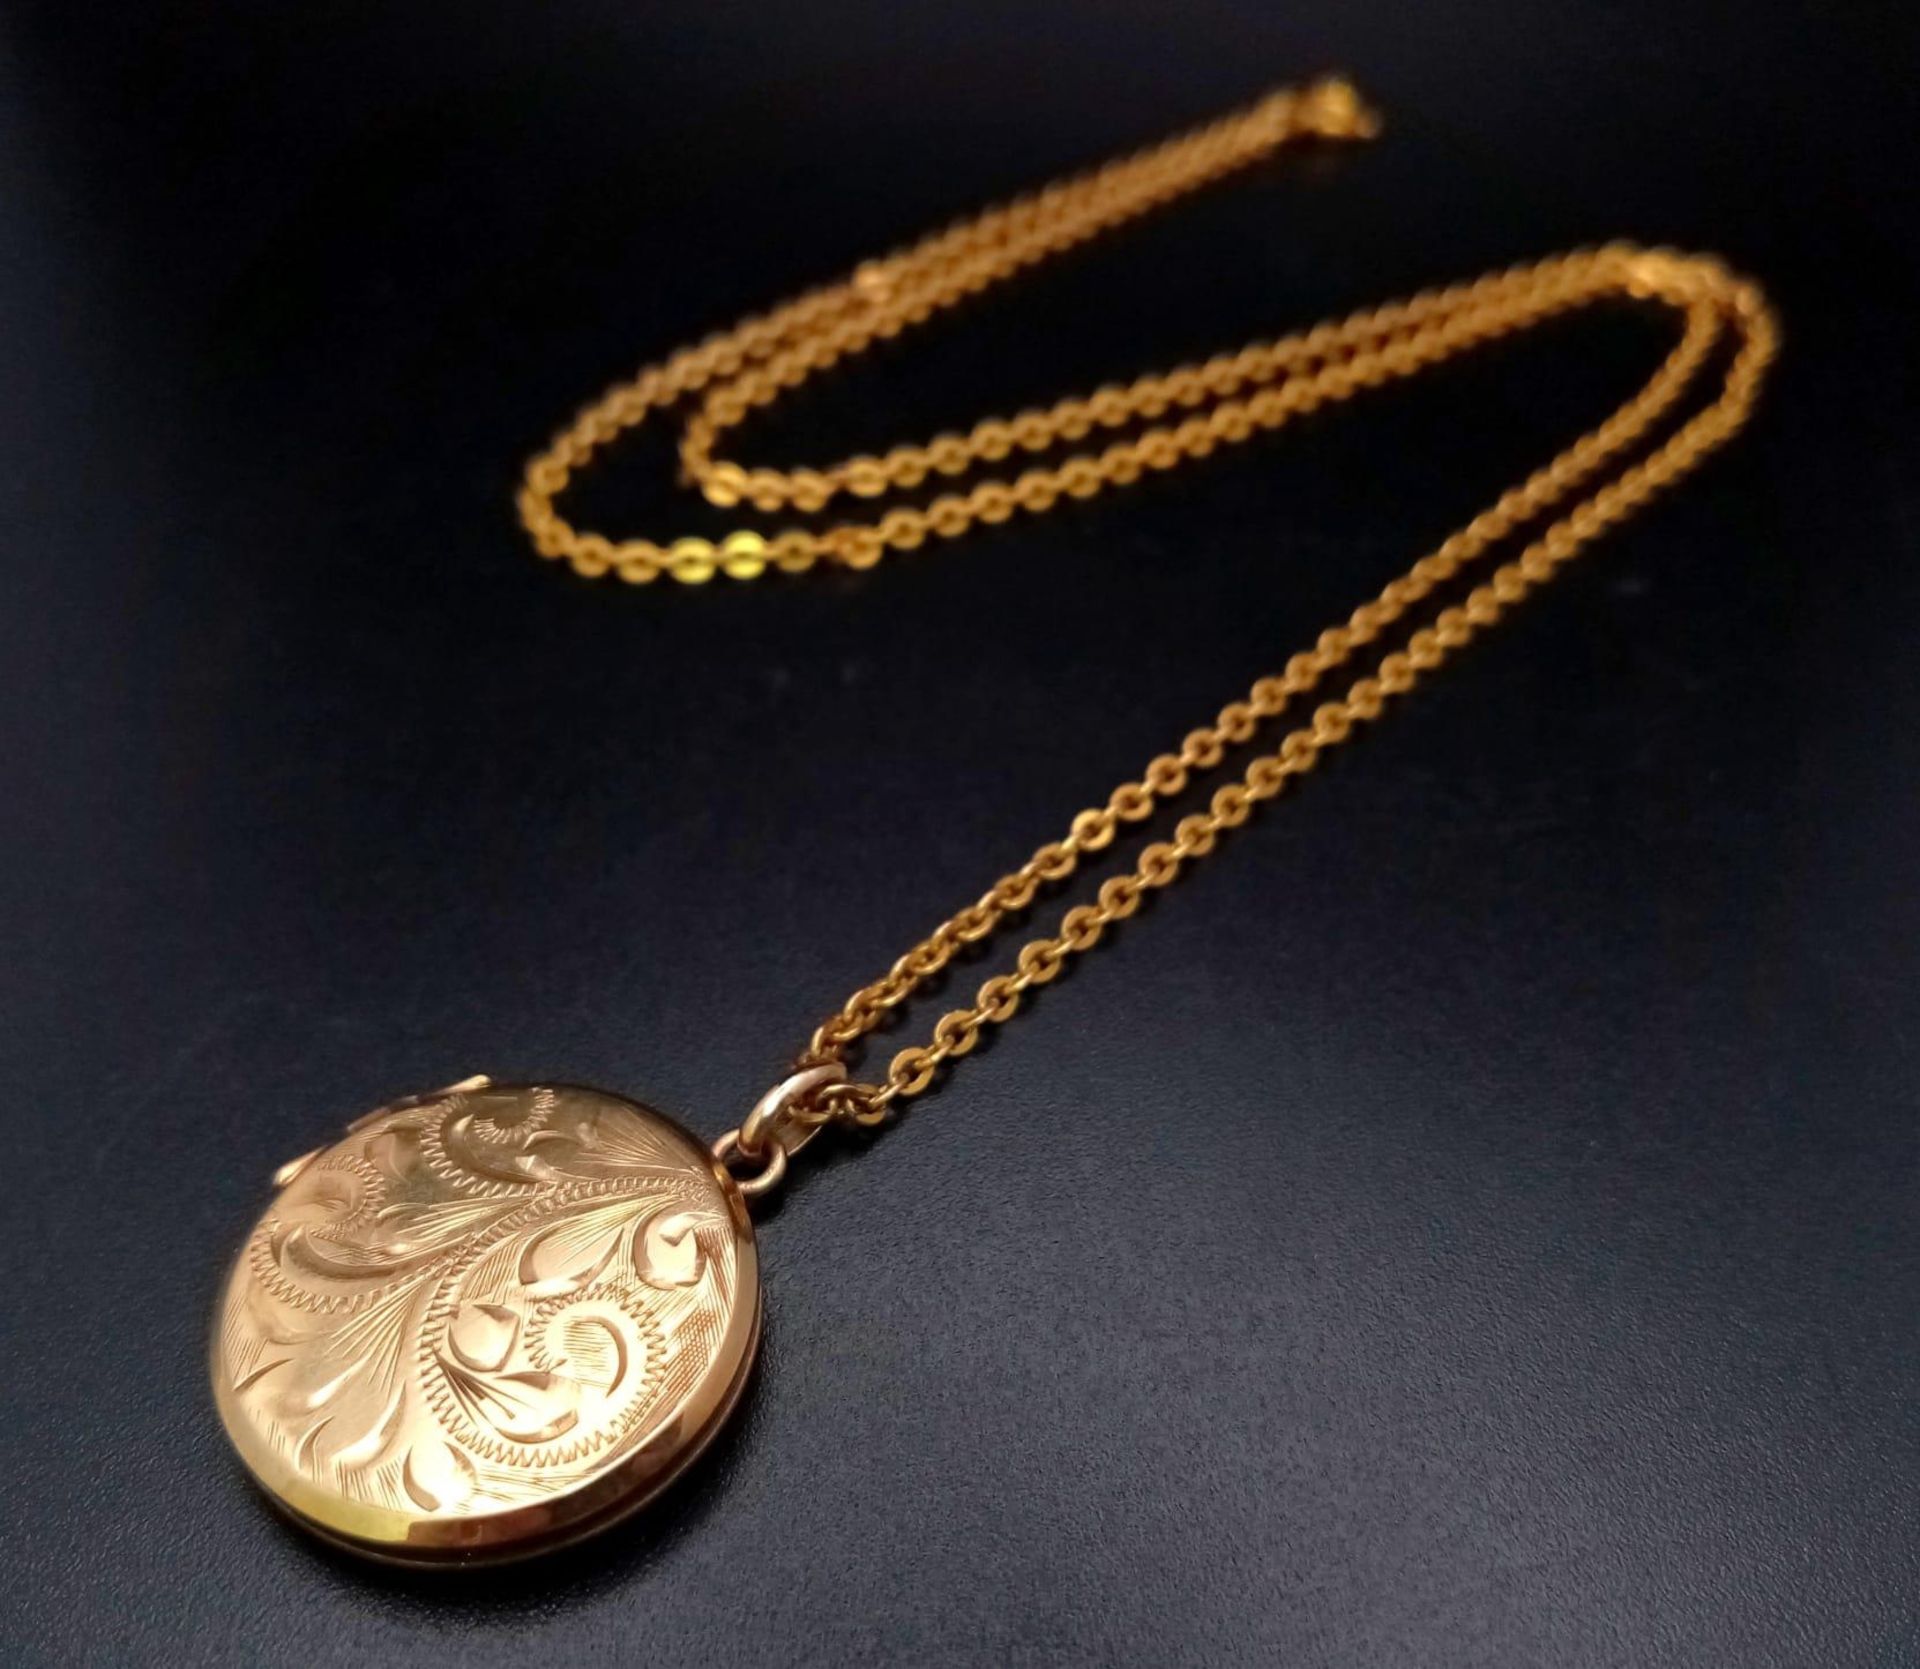 A Vintage 9K Yellow Gold Locket on a 9K Yellow Gold Necklace. 20mm pendant diameter. 52cm length.